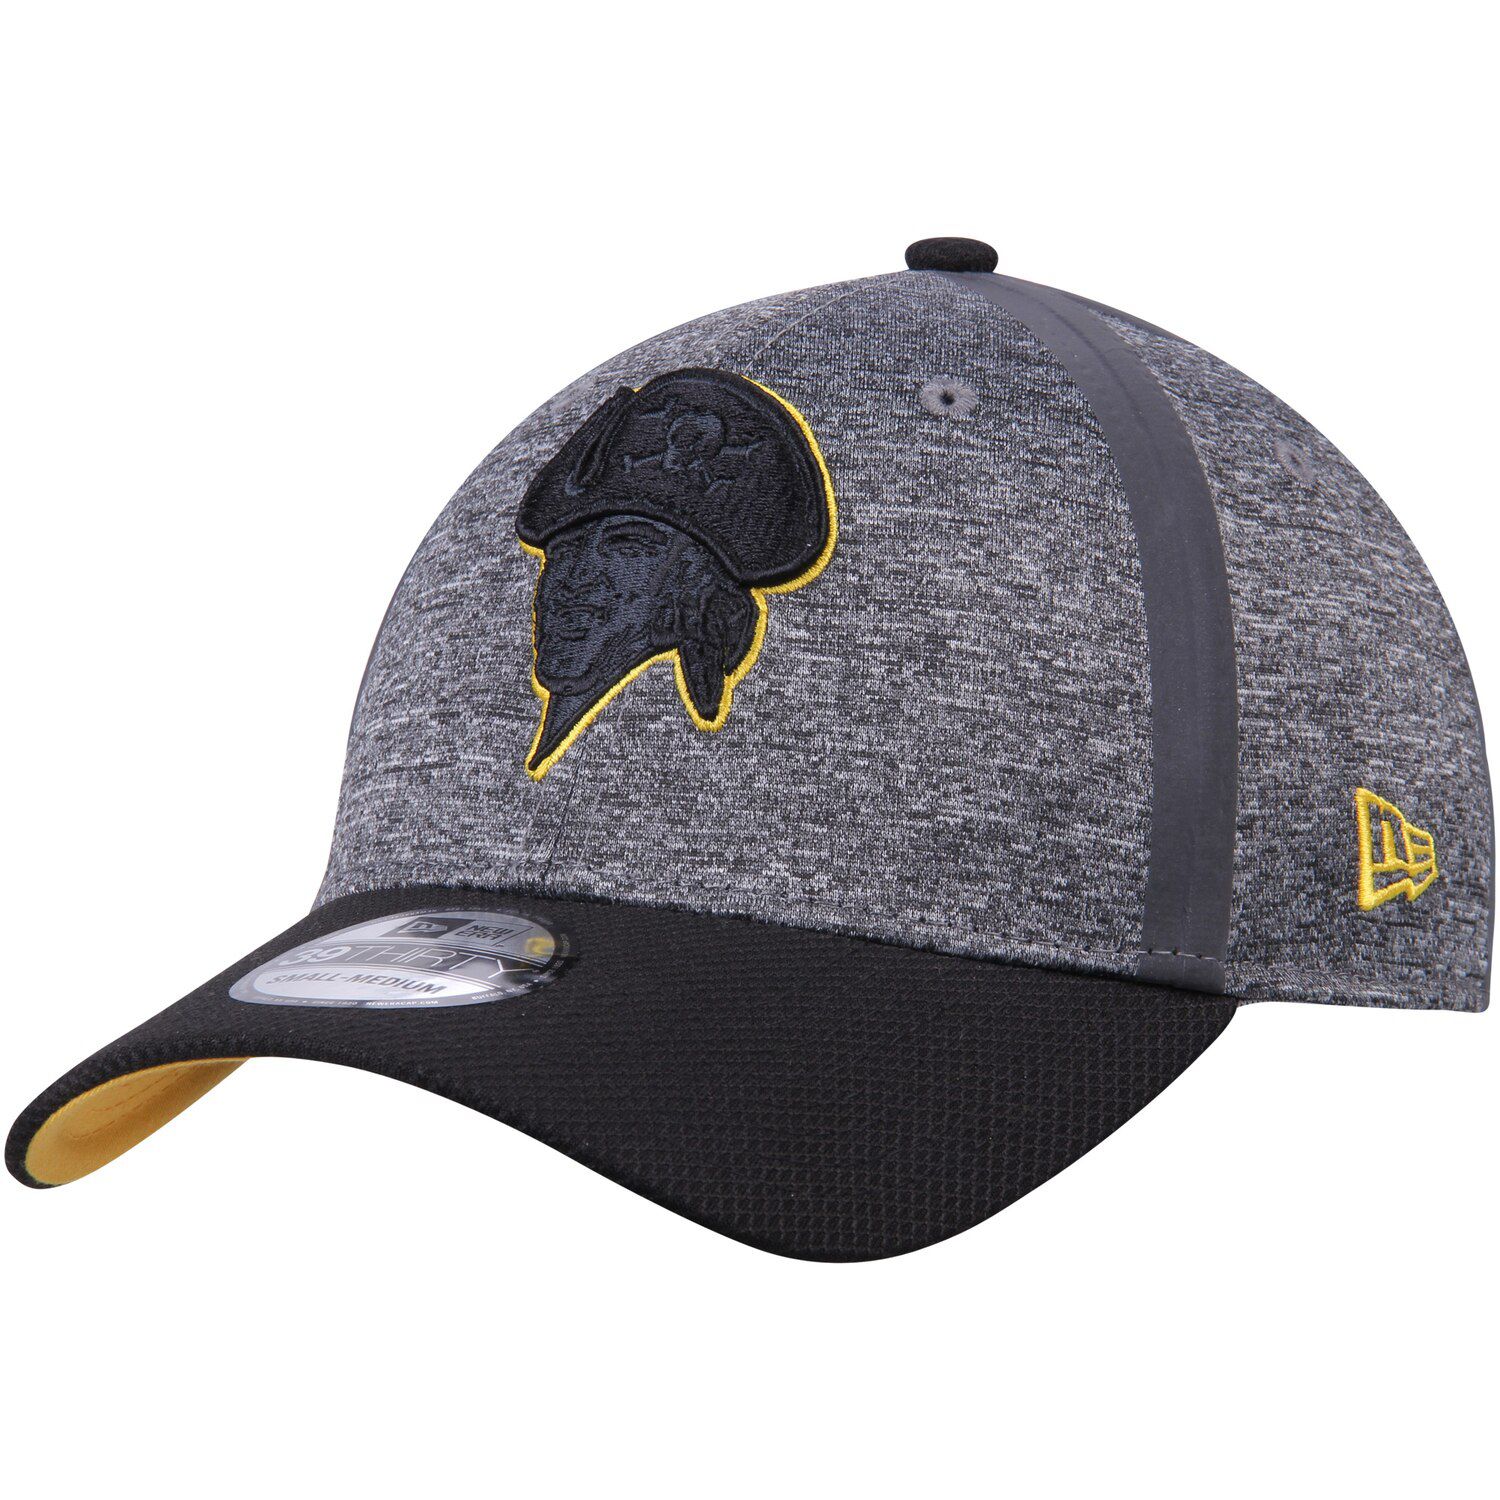 pittsburgh pirates clubhouse store